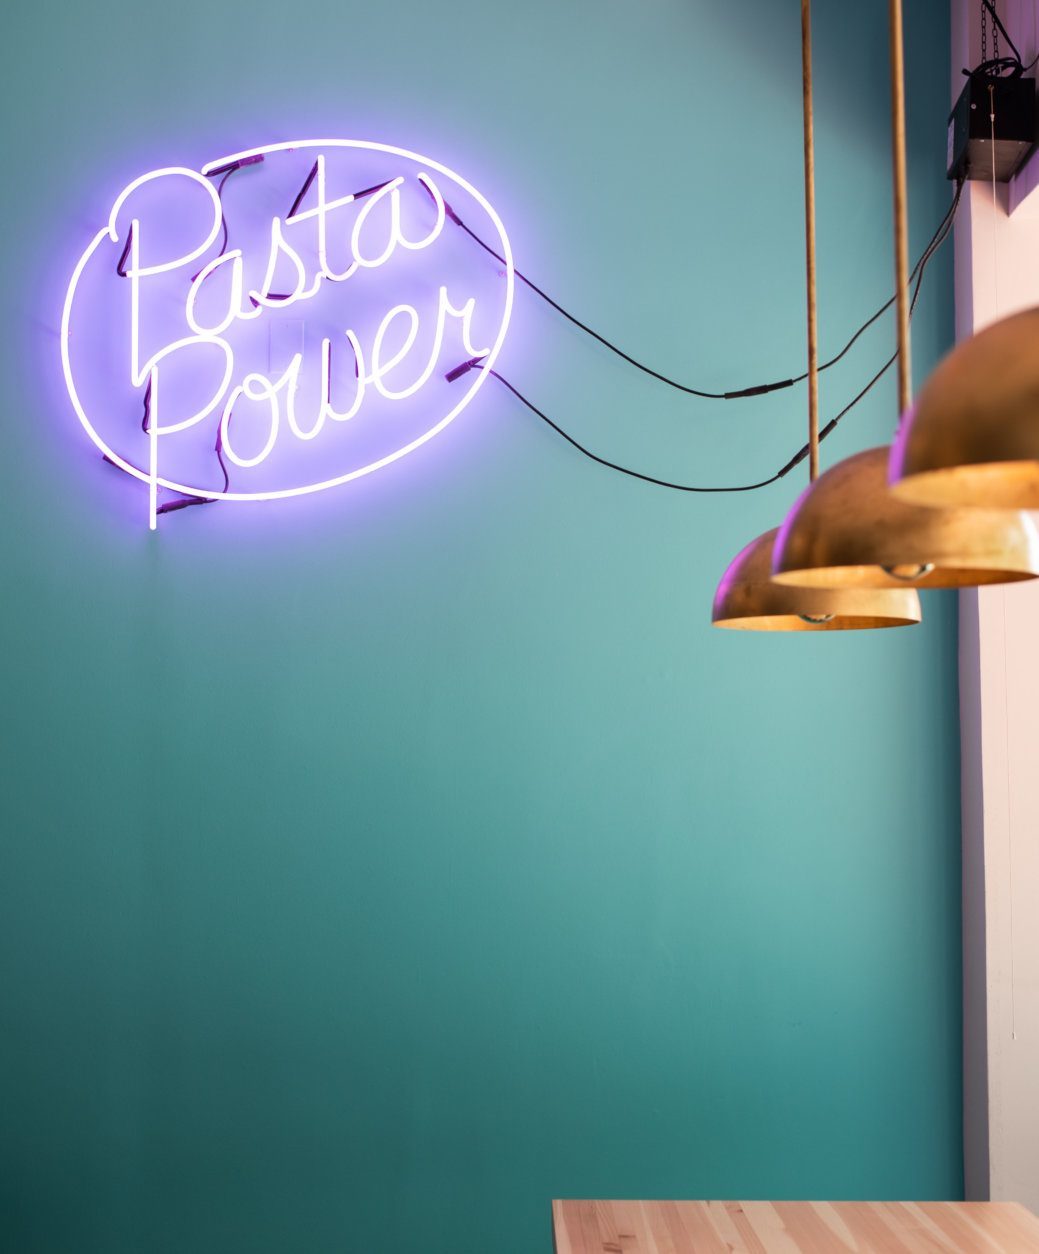 Neon sign reads "Pasta Power"